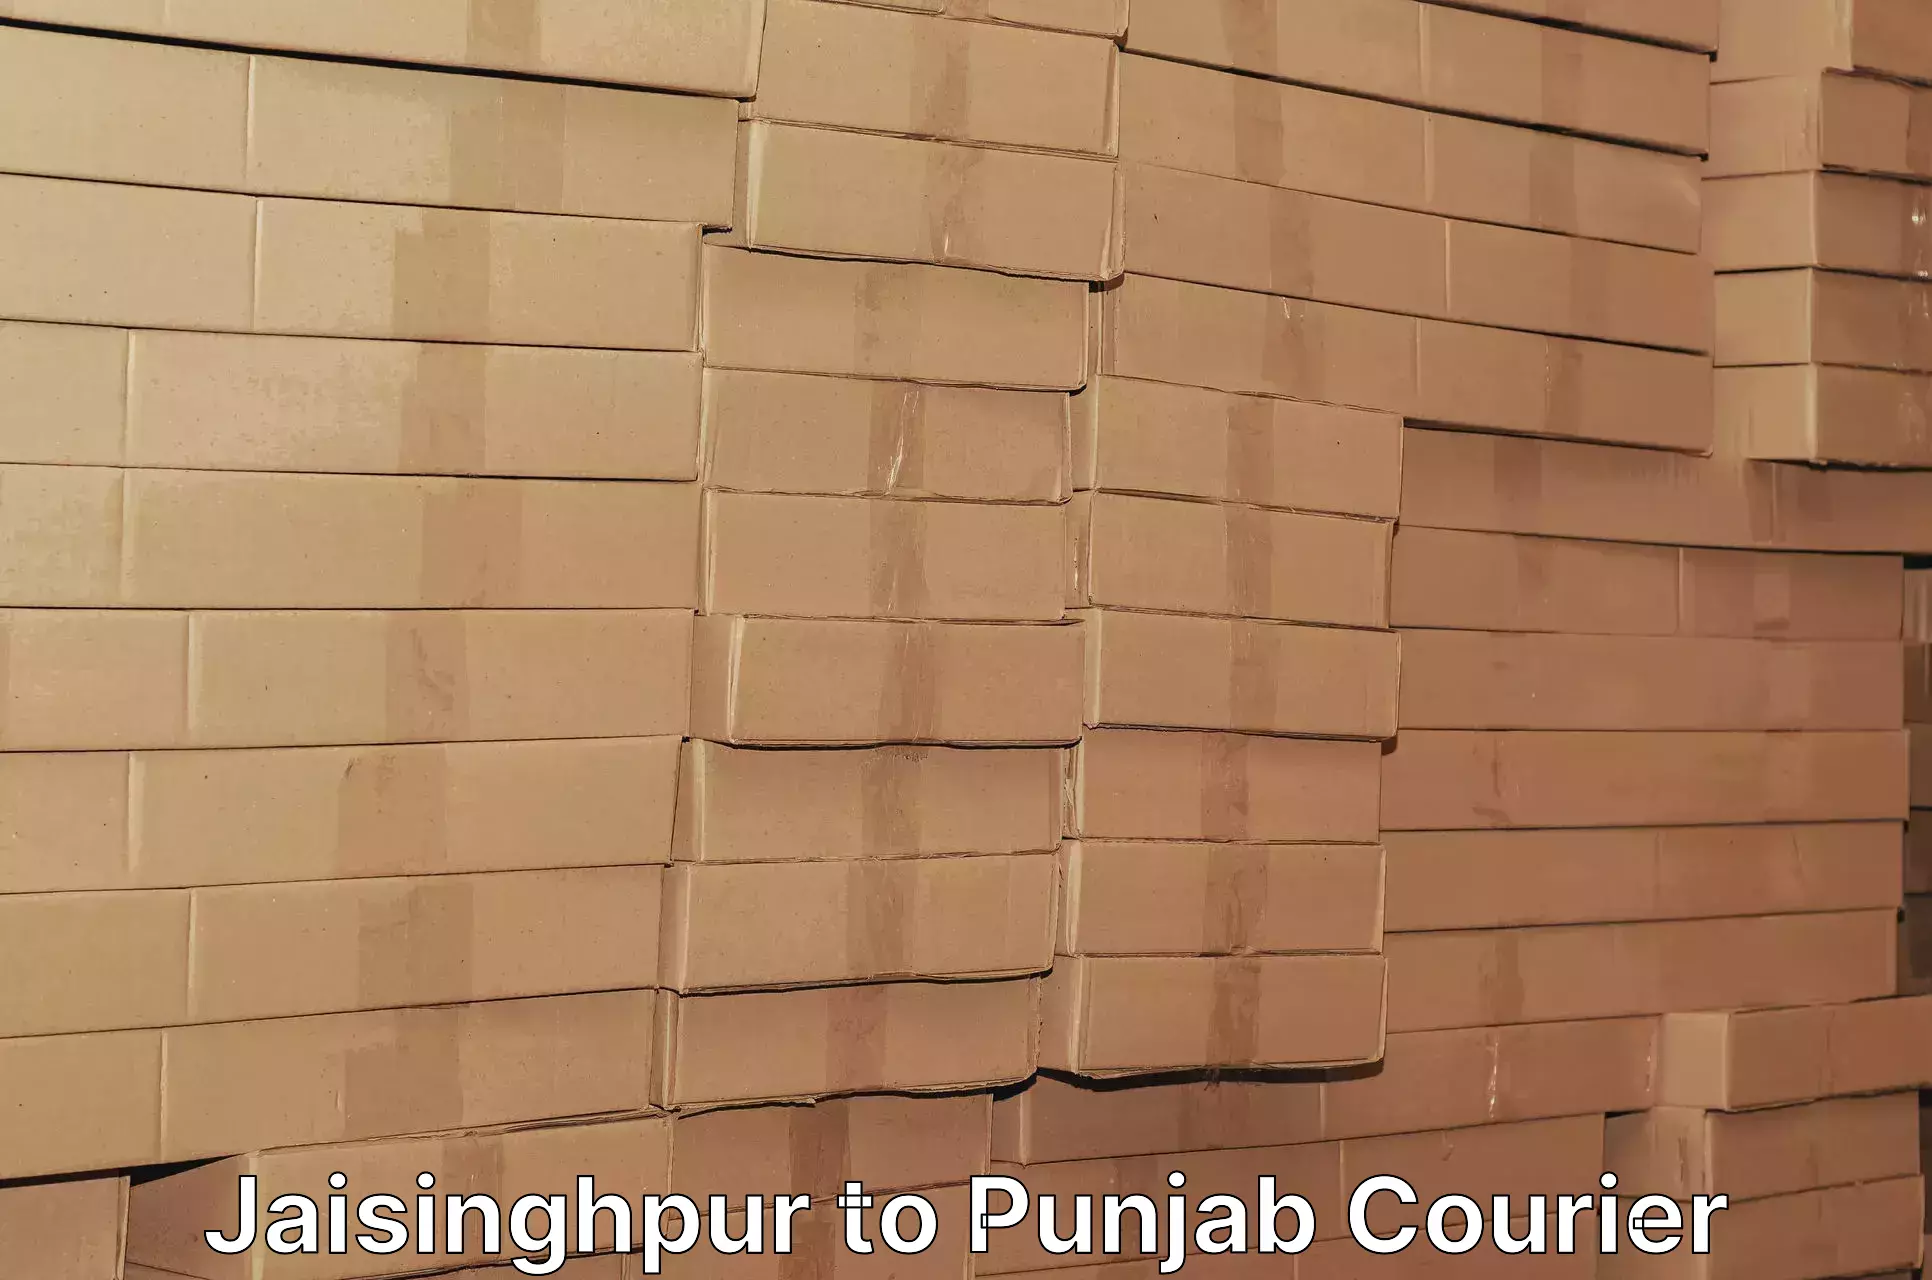 Customer-oriented courier services in Jaisinghpur to Punjab